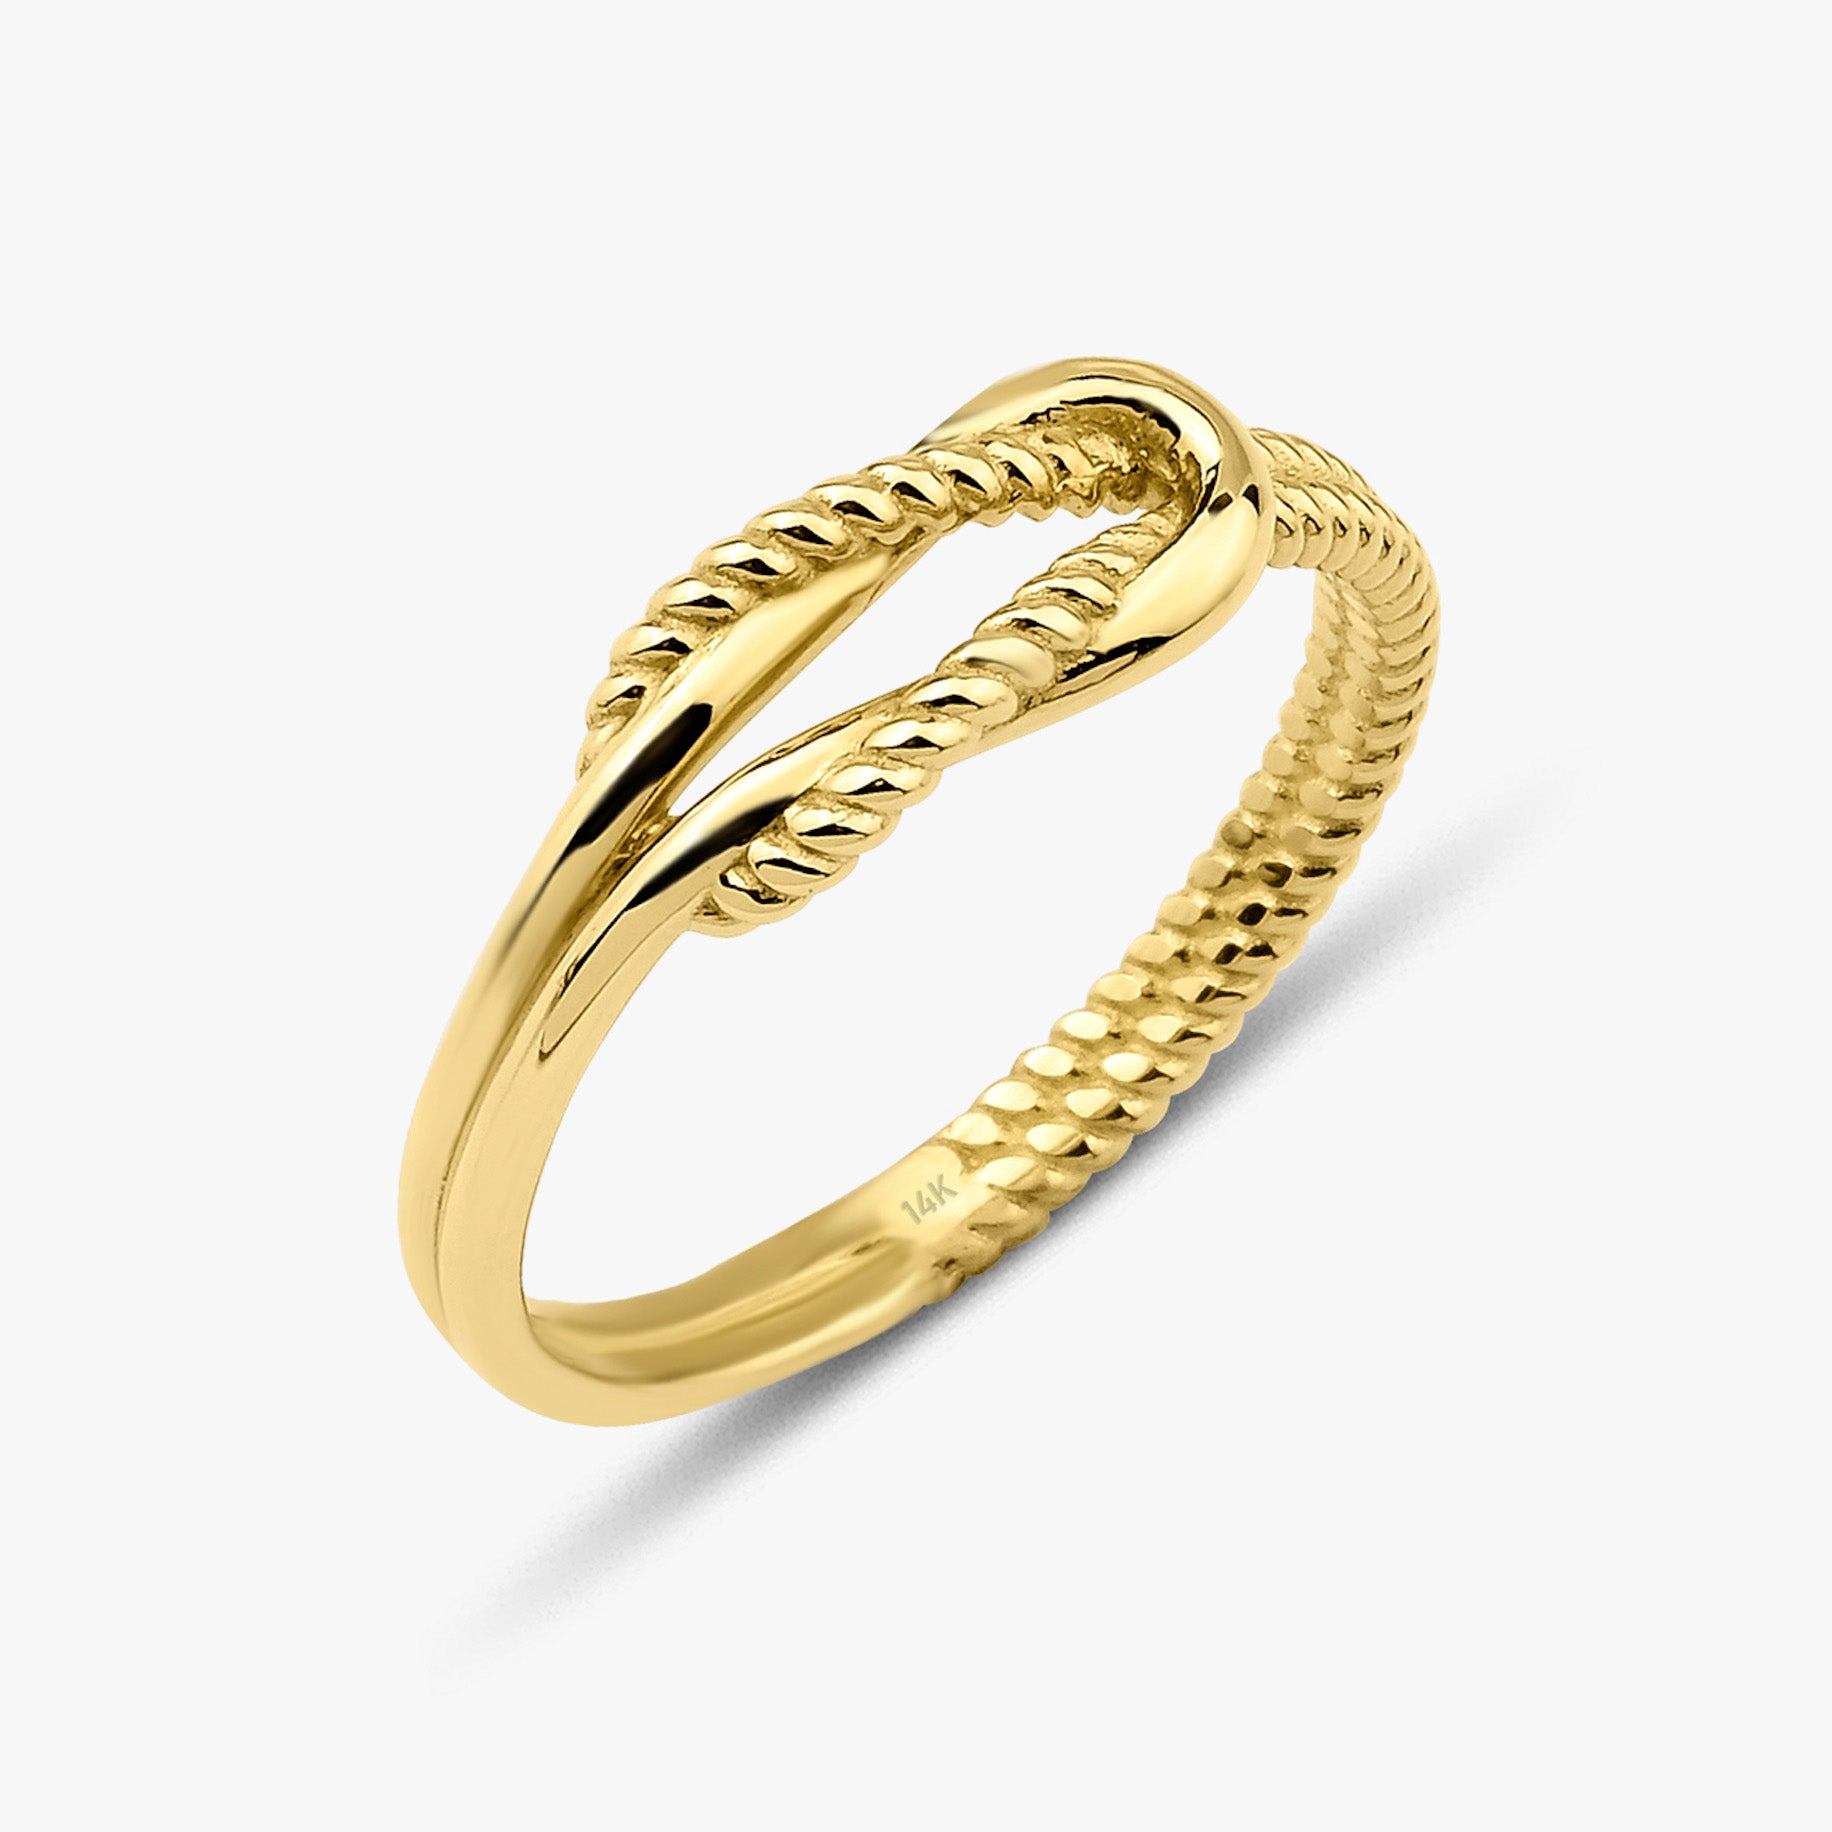 Infinity Knot Ring in 14K Gold